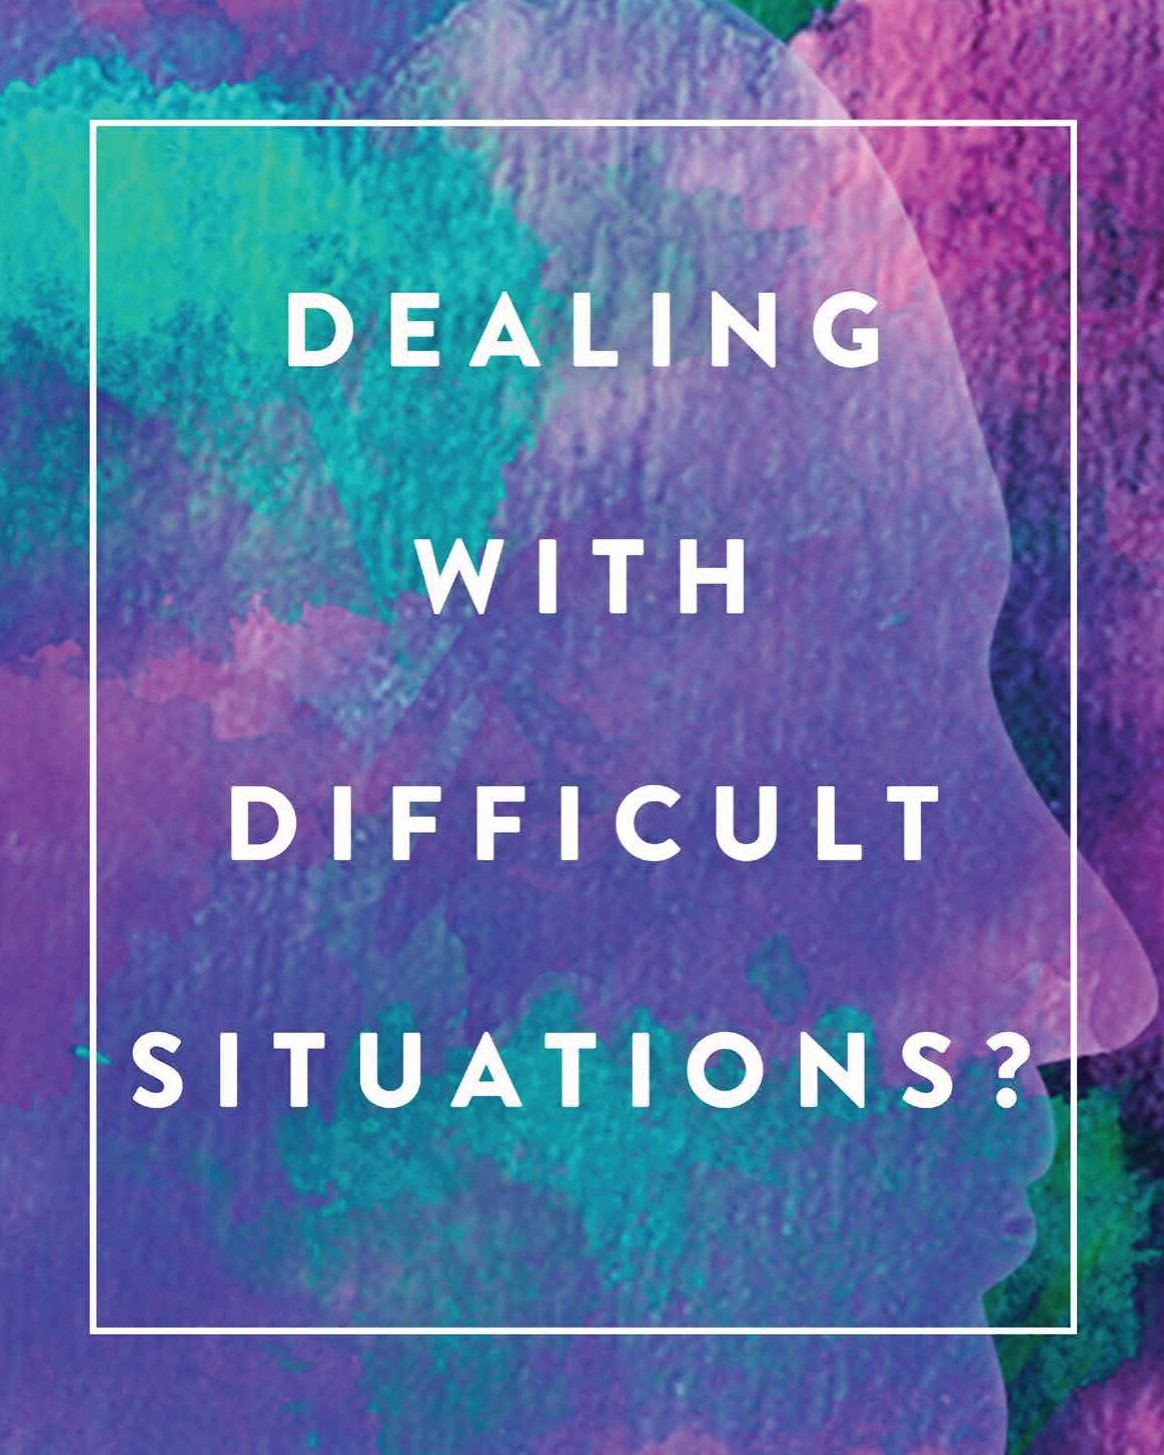 Dealing with difficult situations?